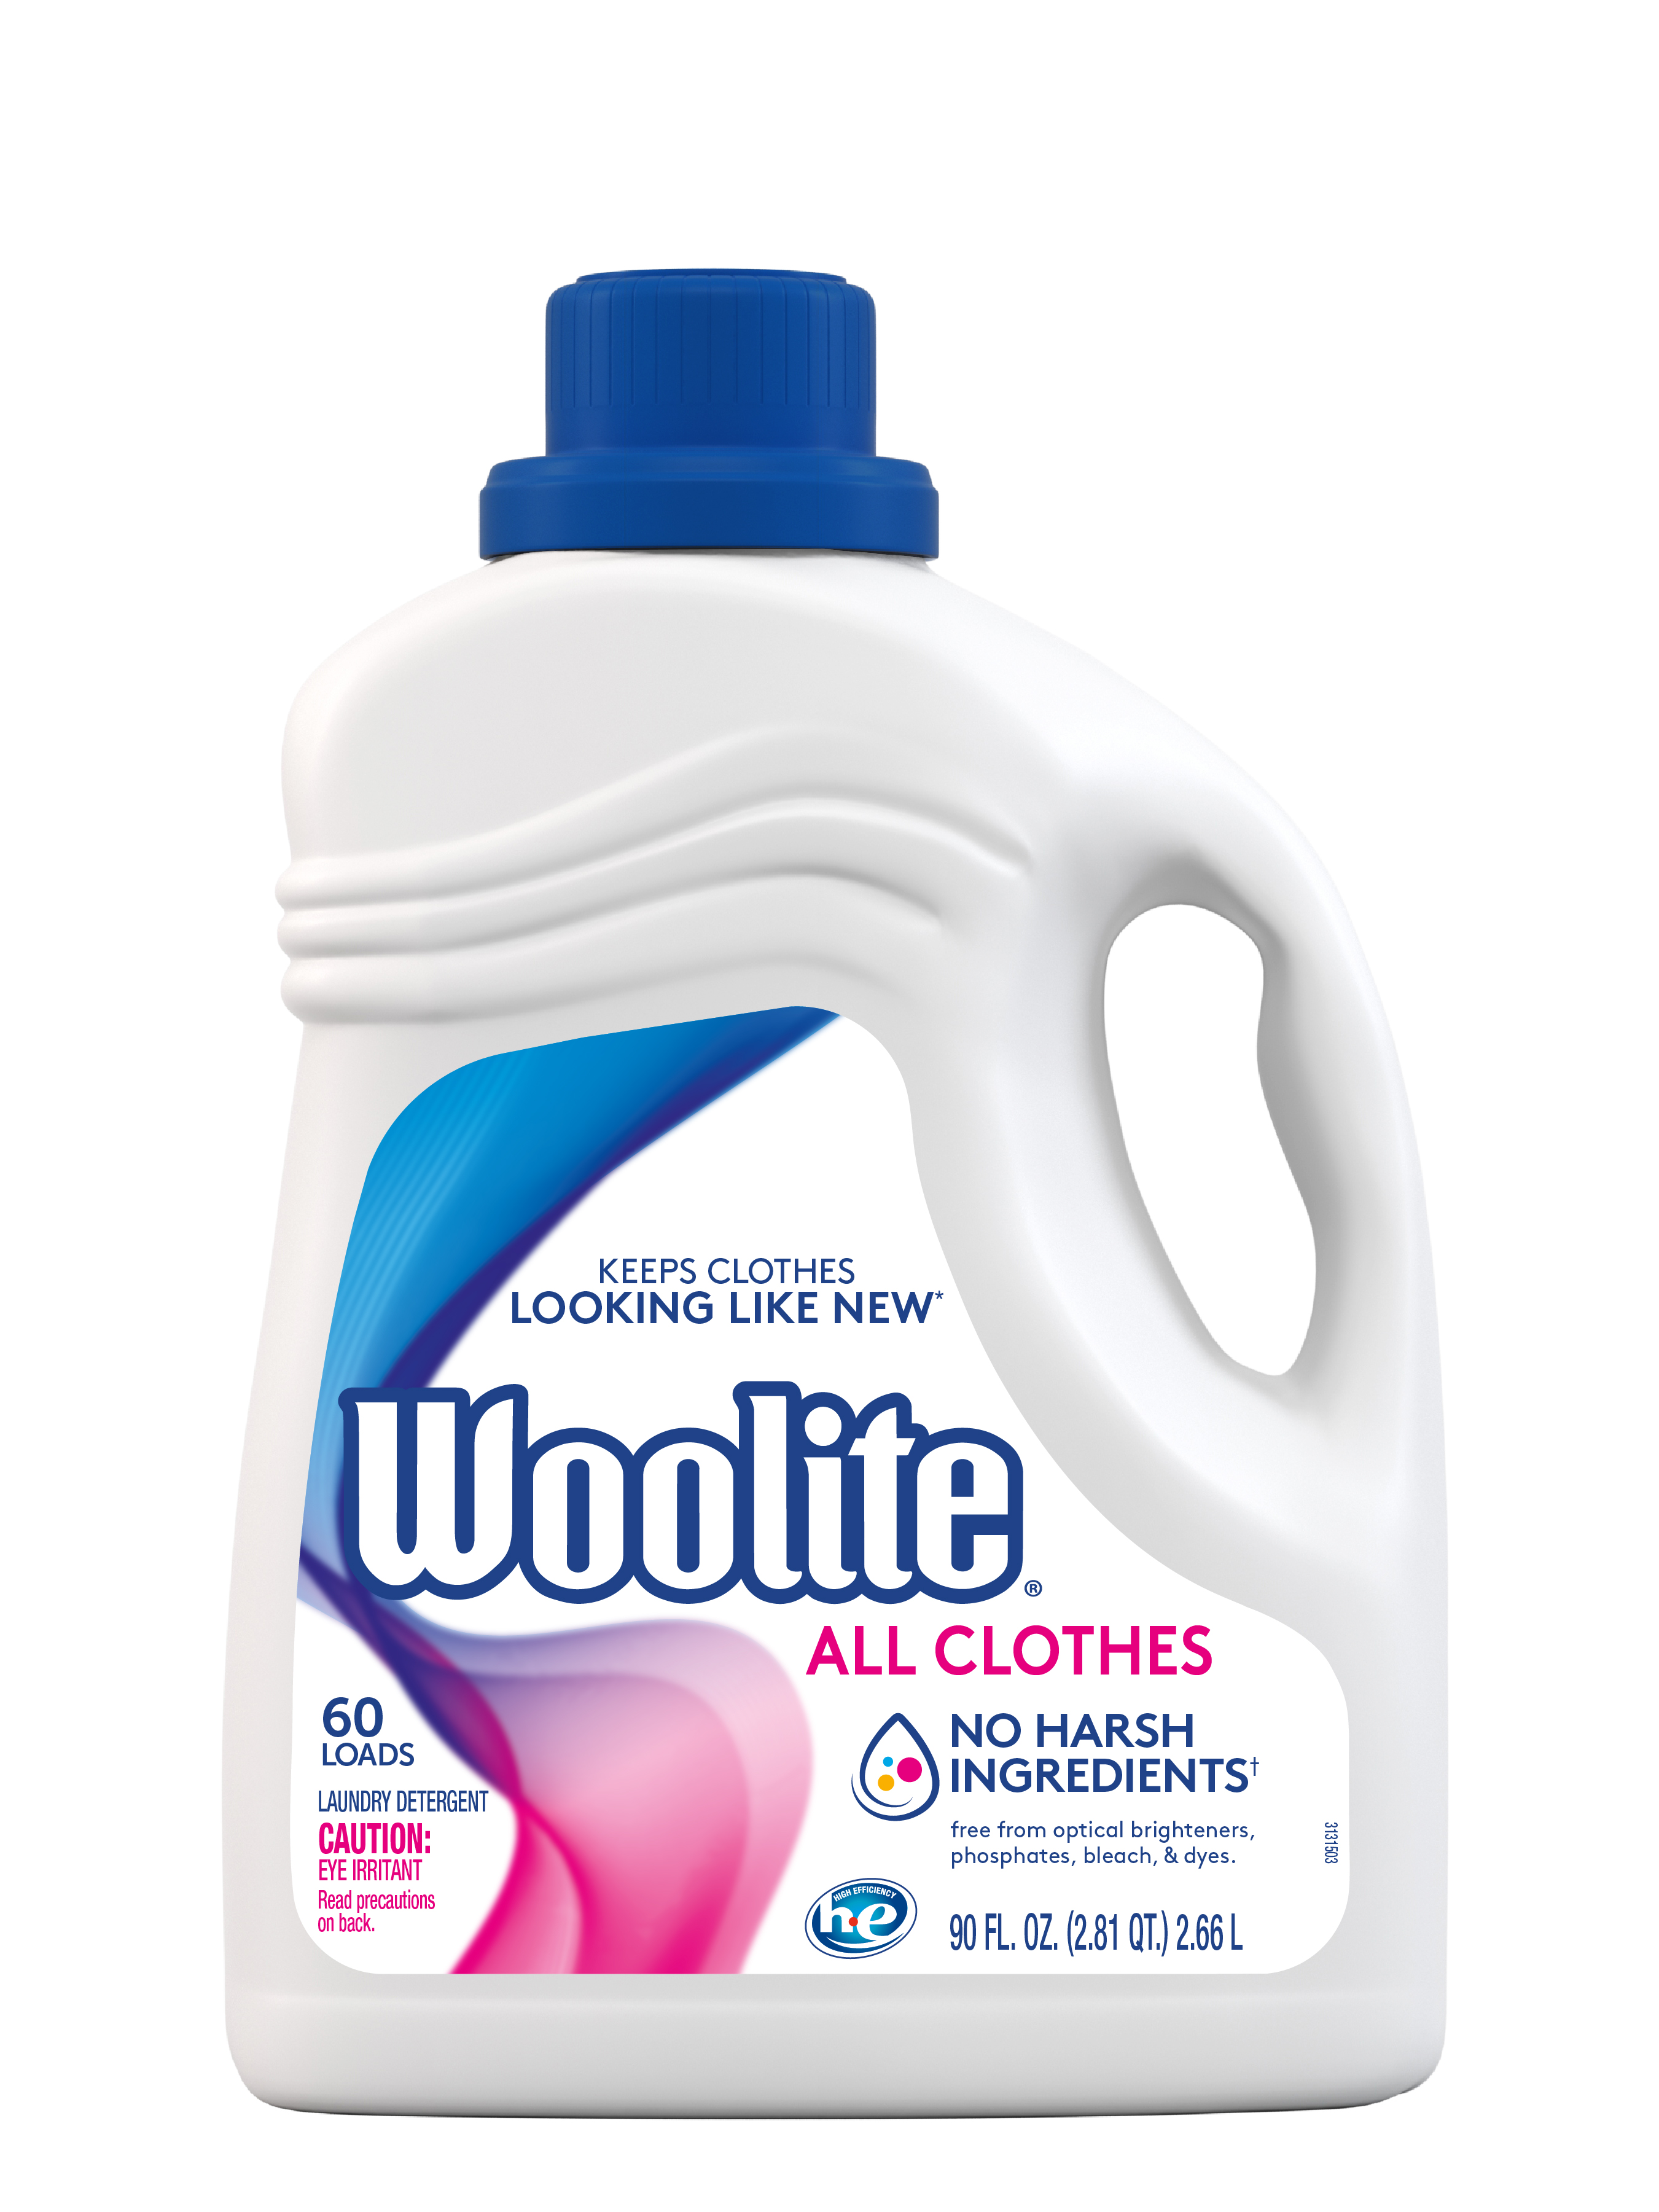 WOOLITE® All Clothes Laundry Detergent (Discontinued Jun-1-2021)